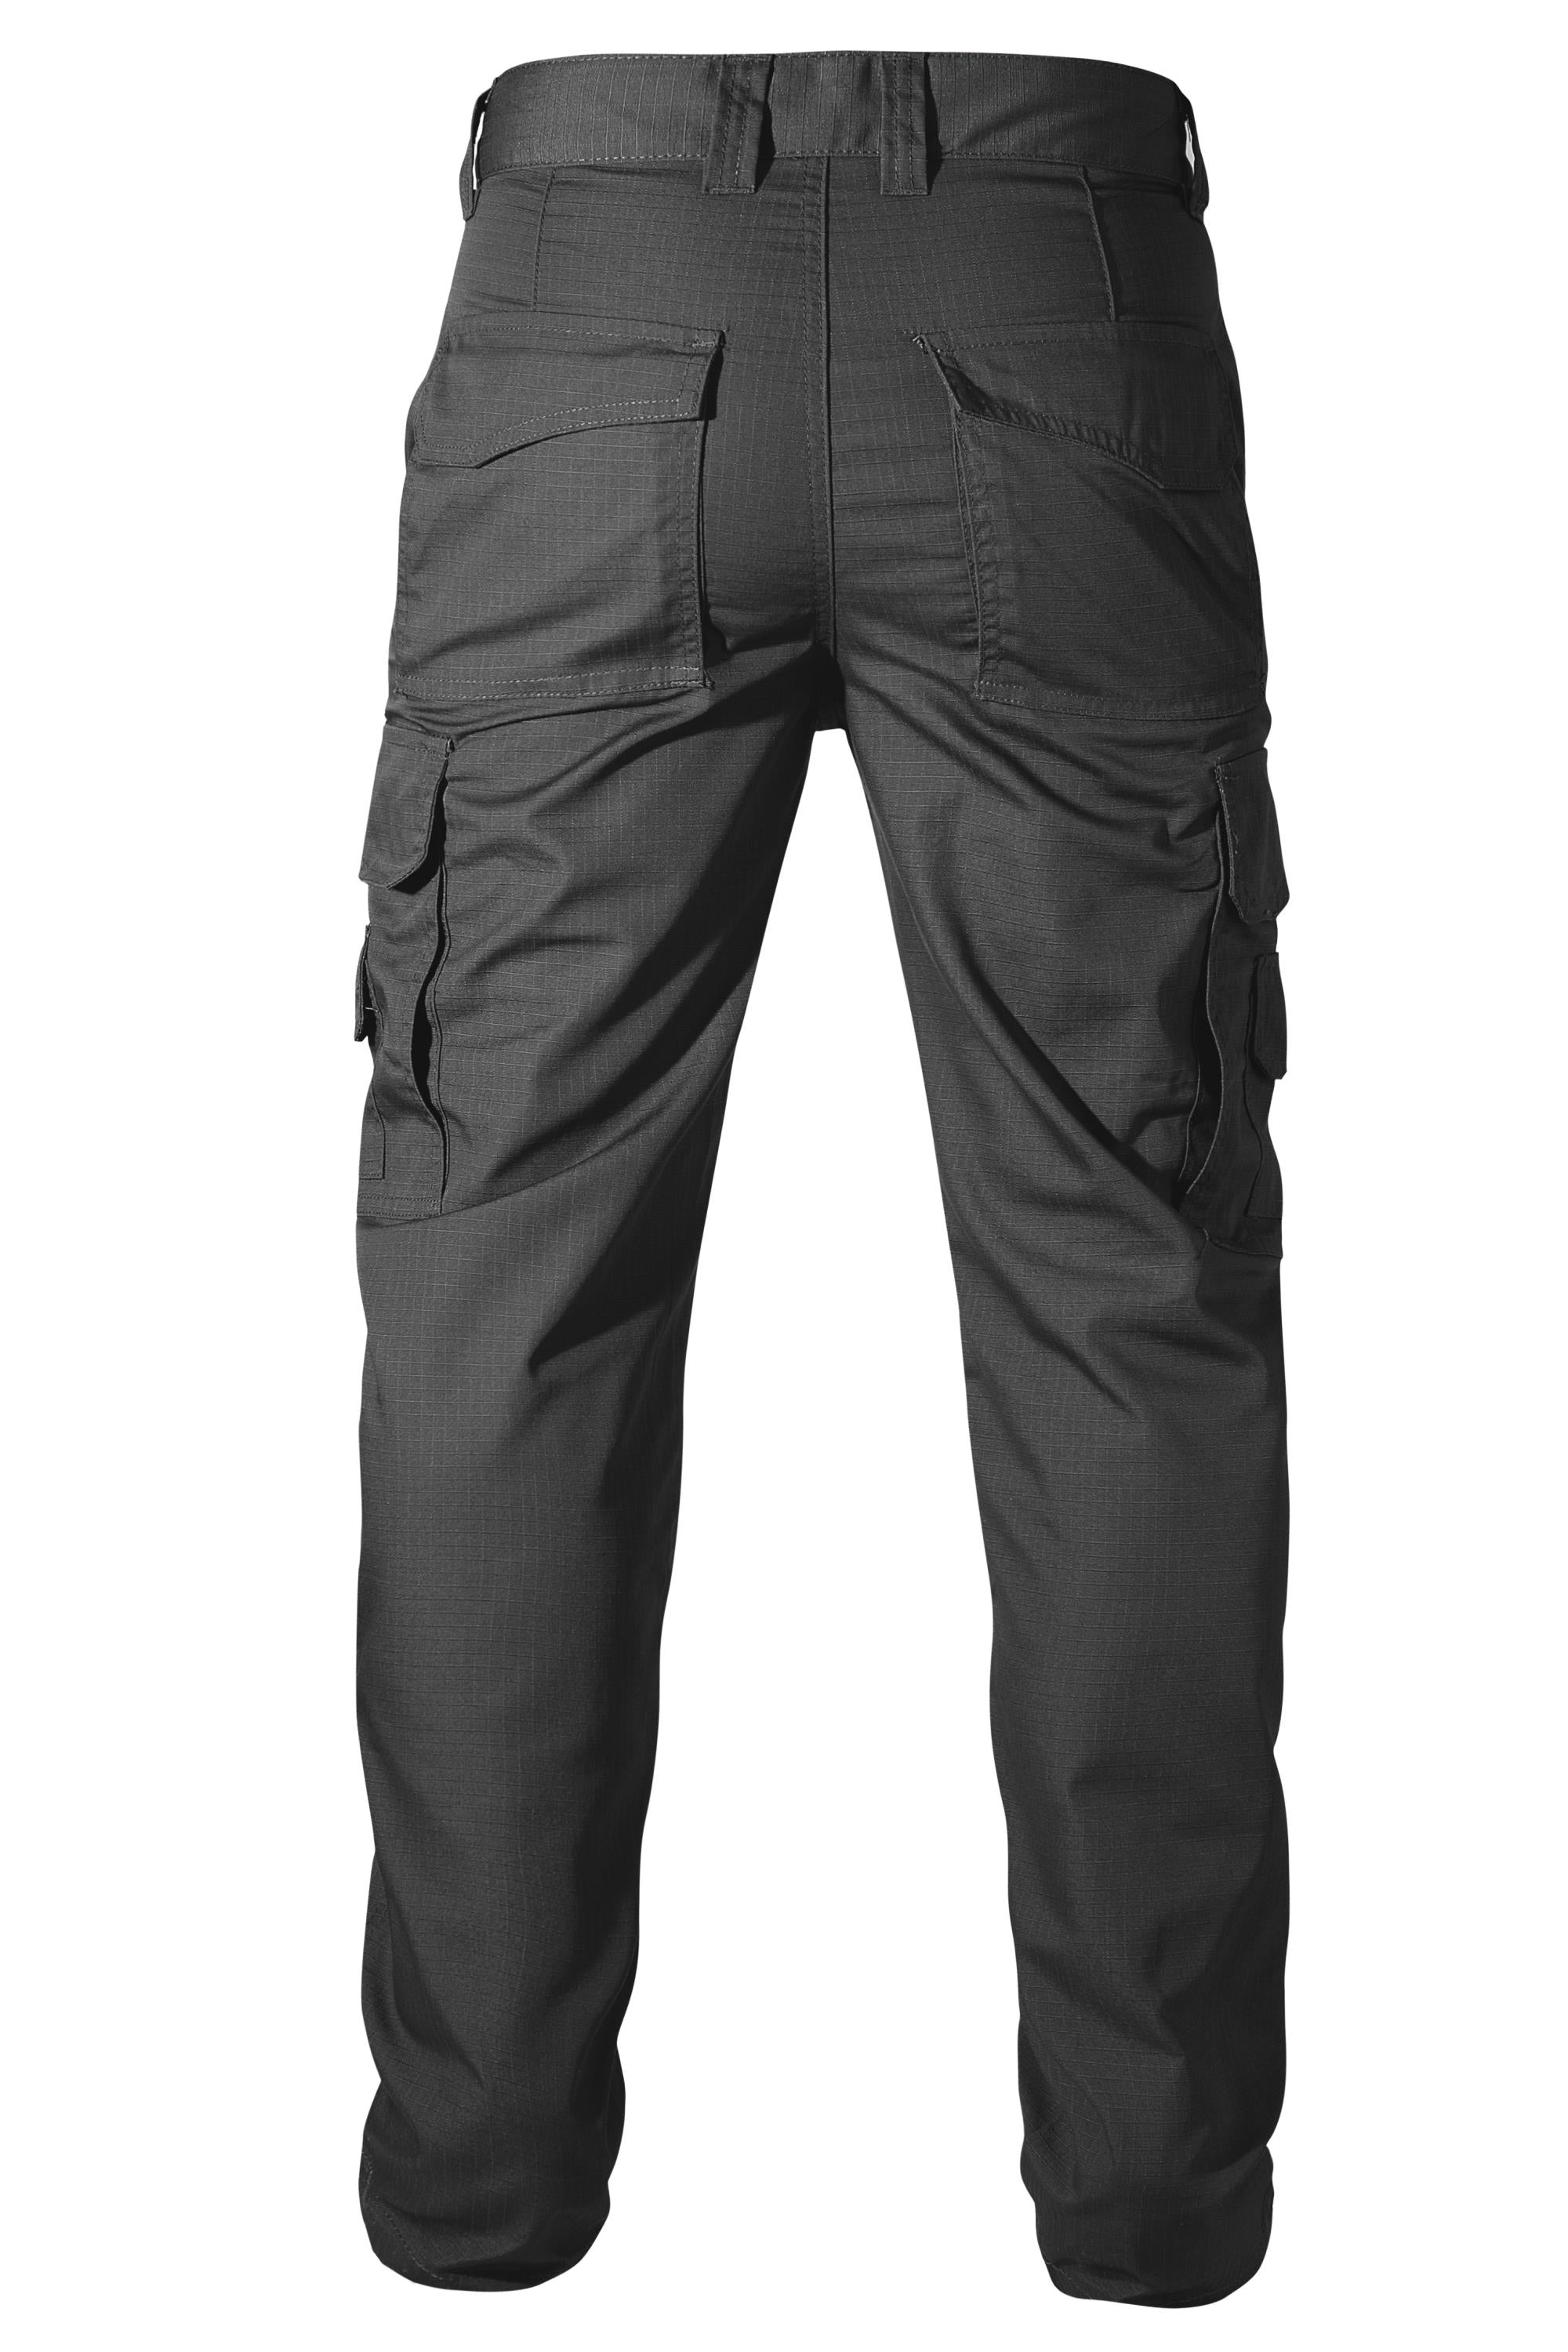 Military Tactical Trousers